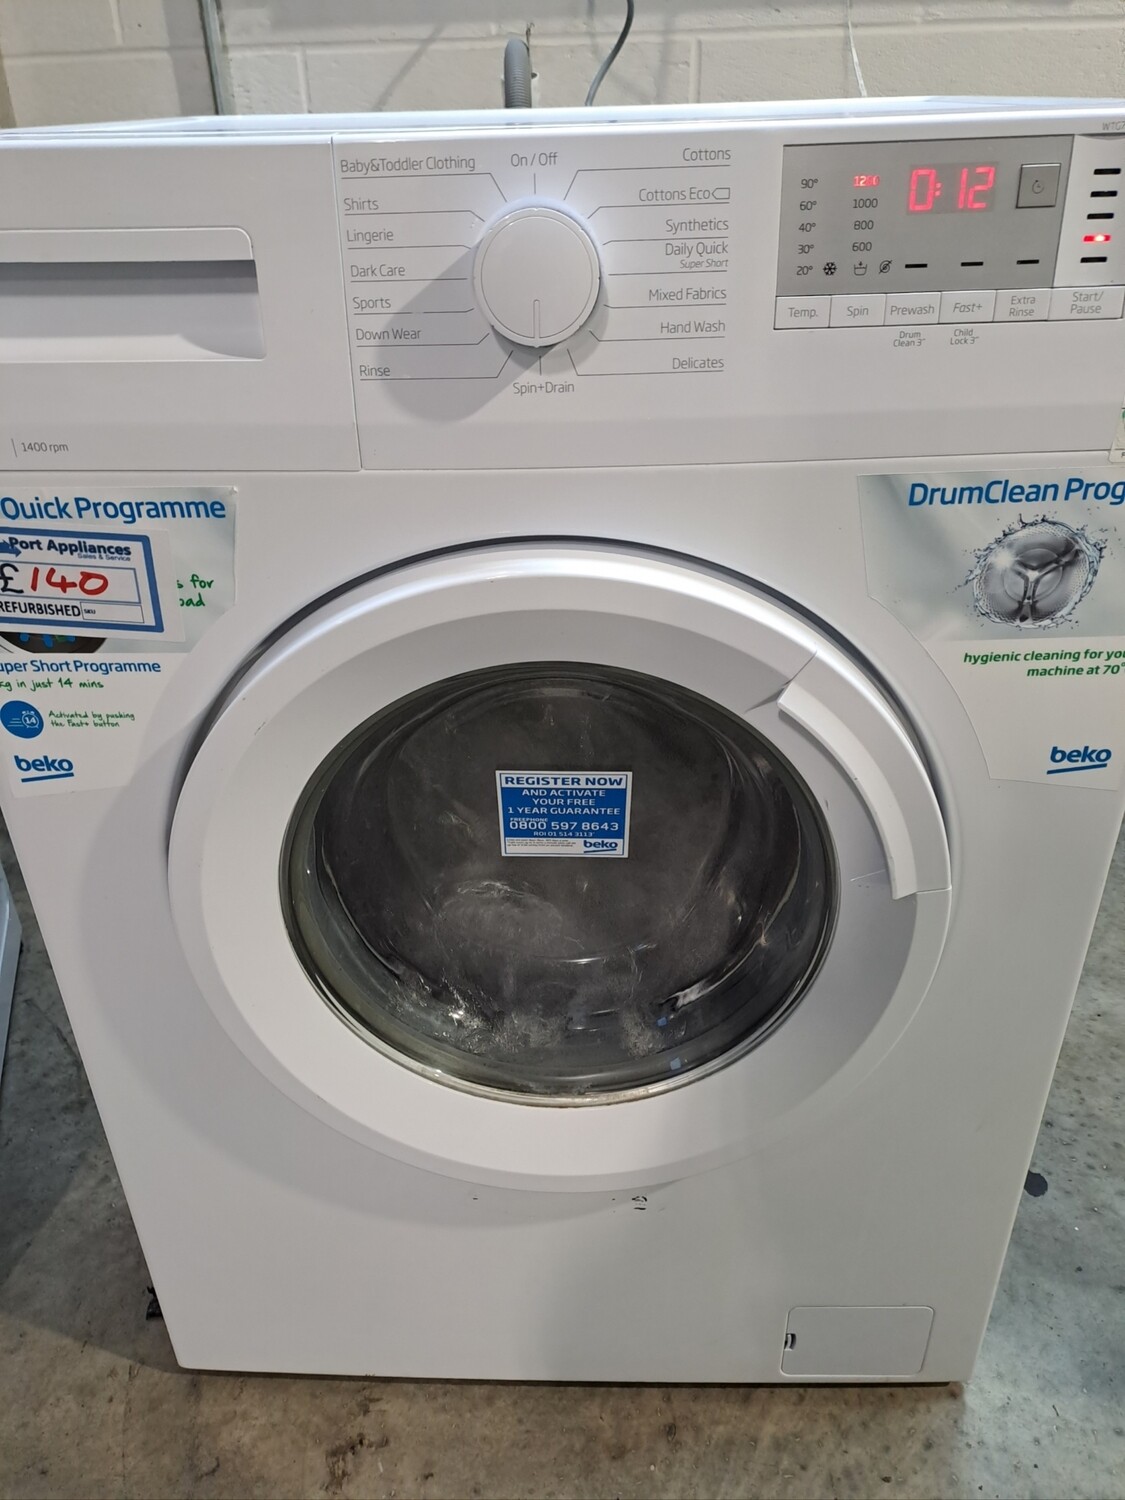 Beko WTG721M1W 7kg Load 1200 Spin Washing Machine - White - Refurbished - 6 Month Guarantee. Located In our Whitby Road Shop 